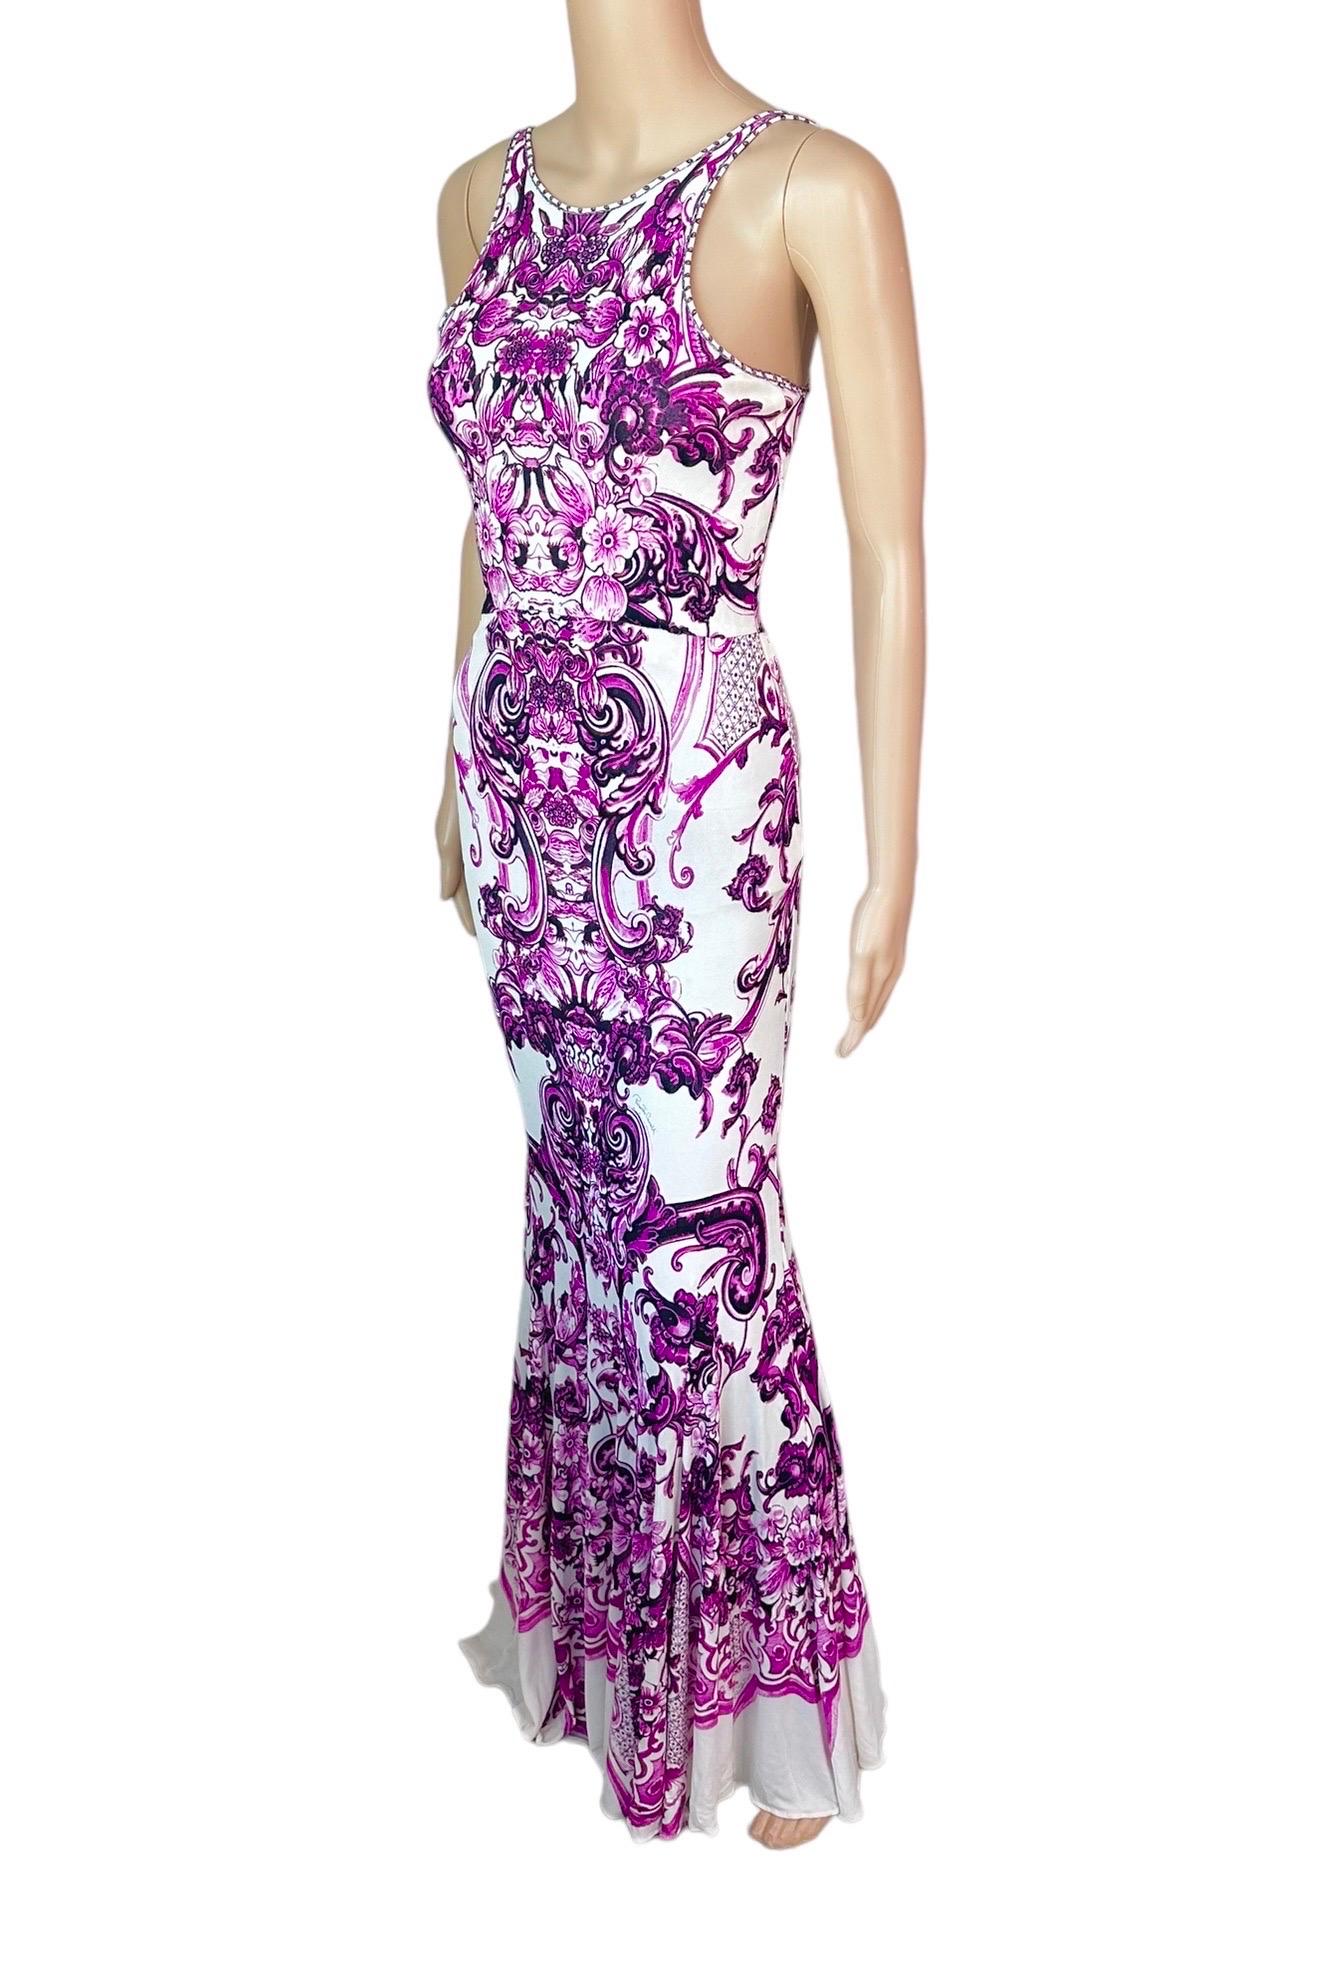 Women's Roberto Cavalli Resort 2013 Chinoiserie Ming Porcelain Sheer Lace Evening Dress For Sale